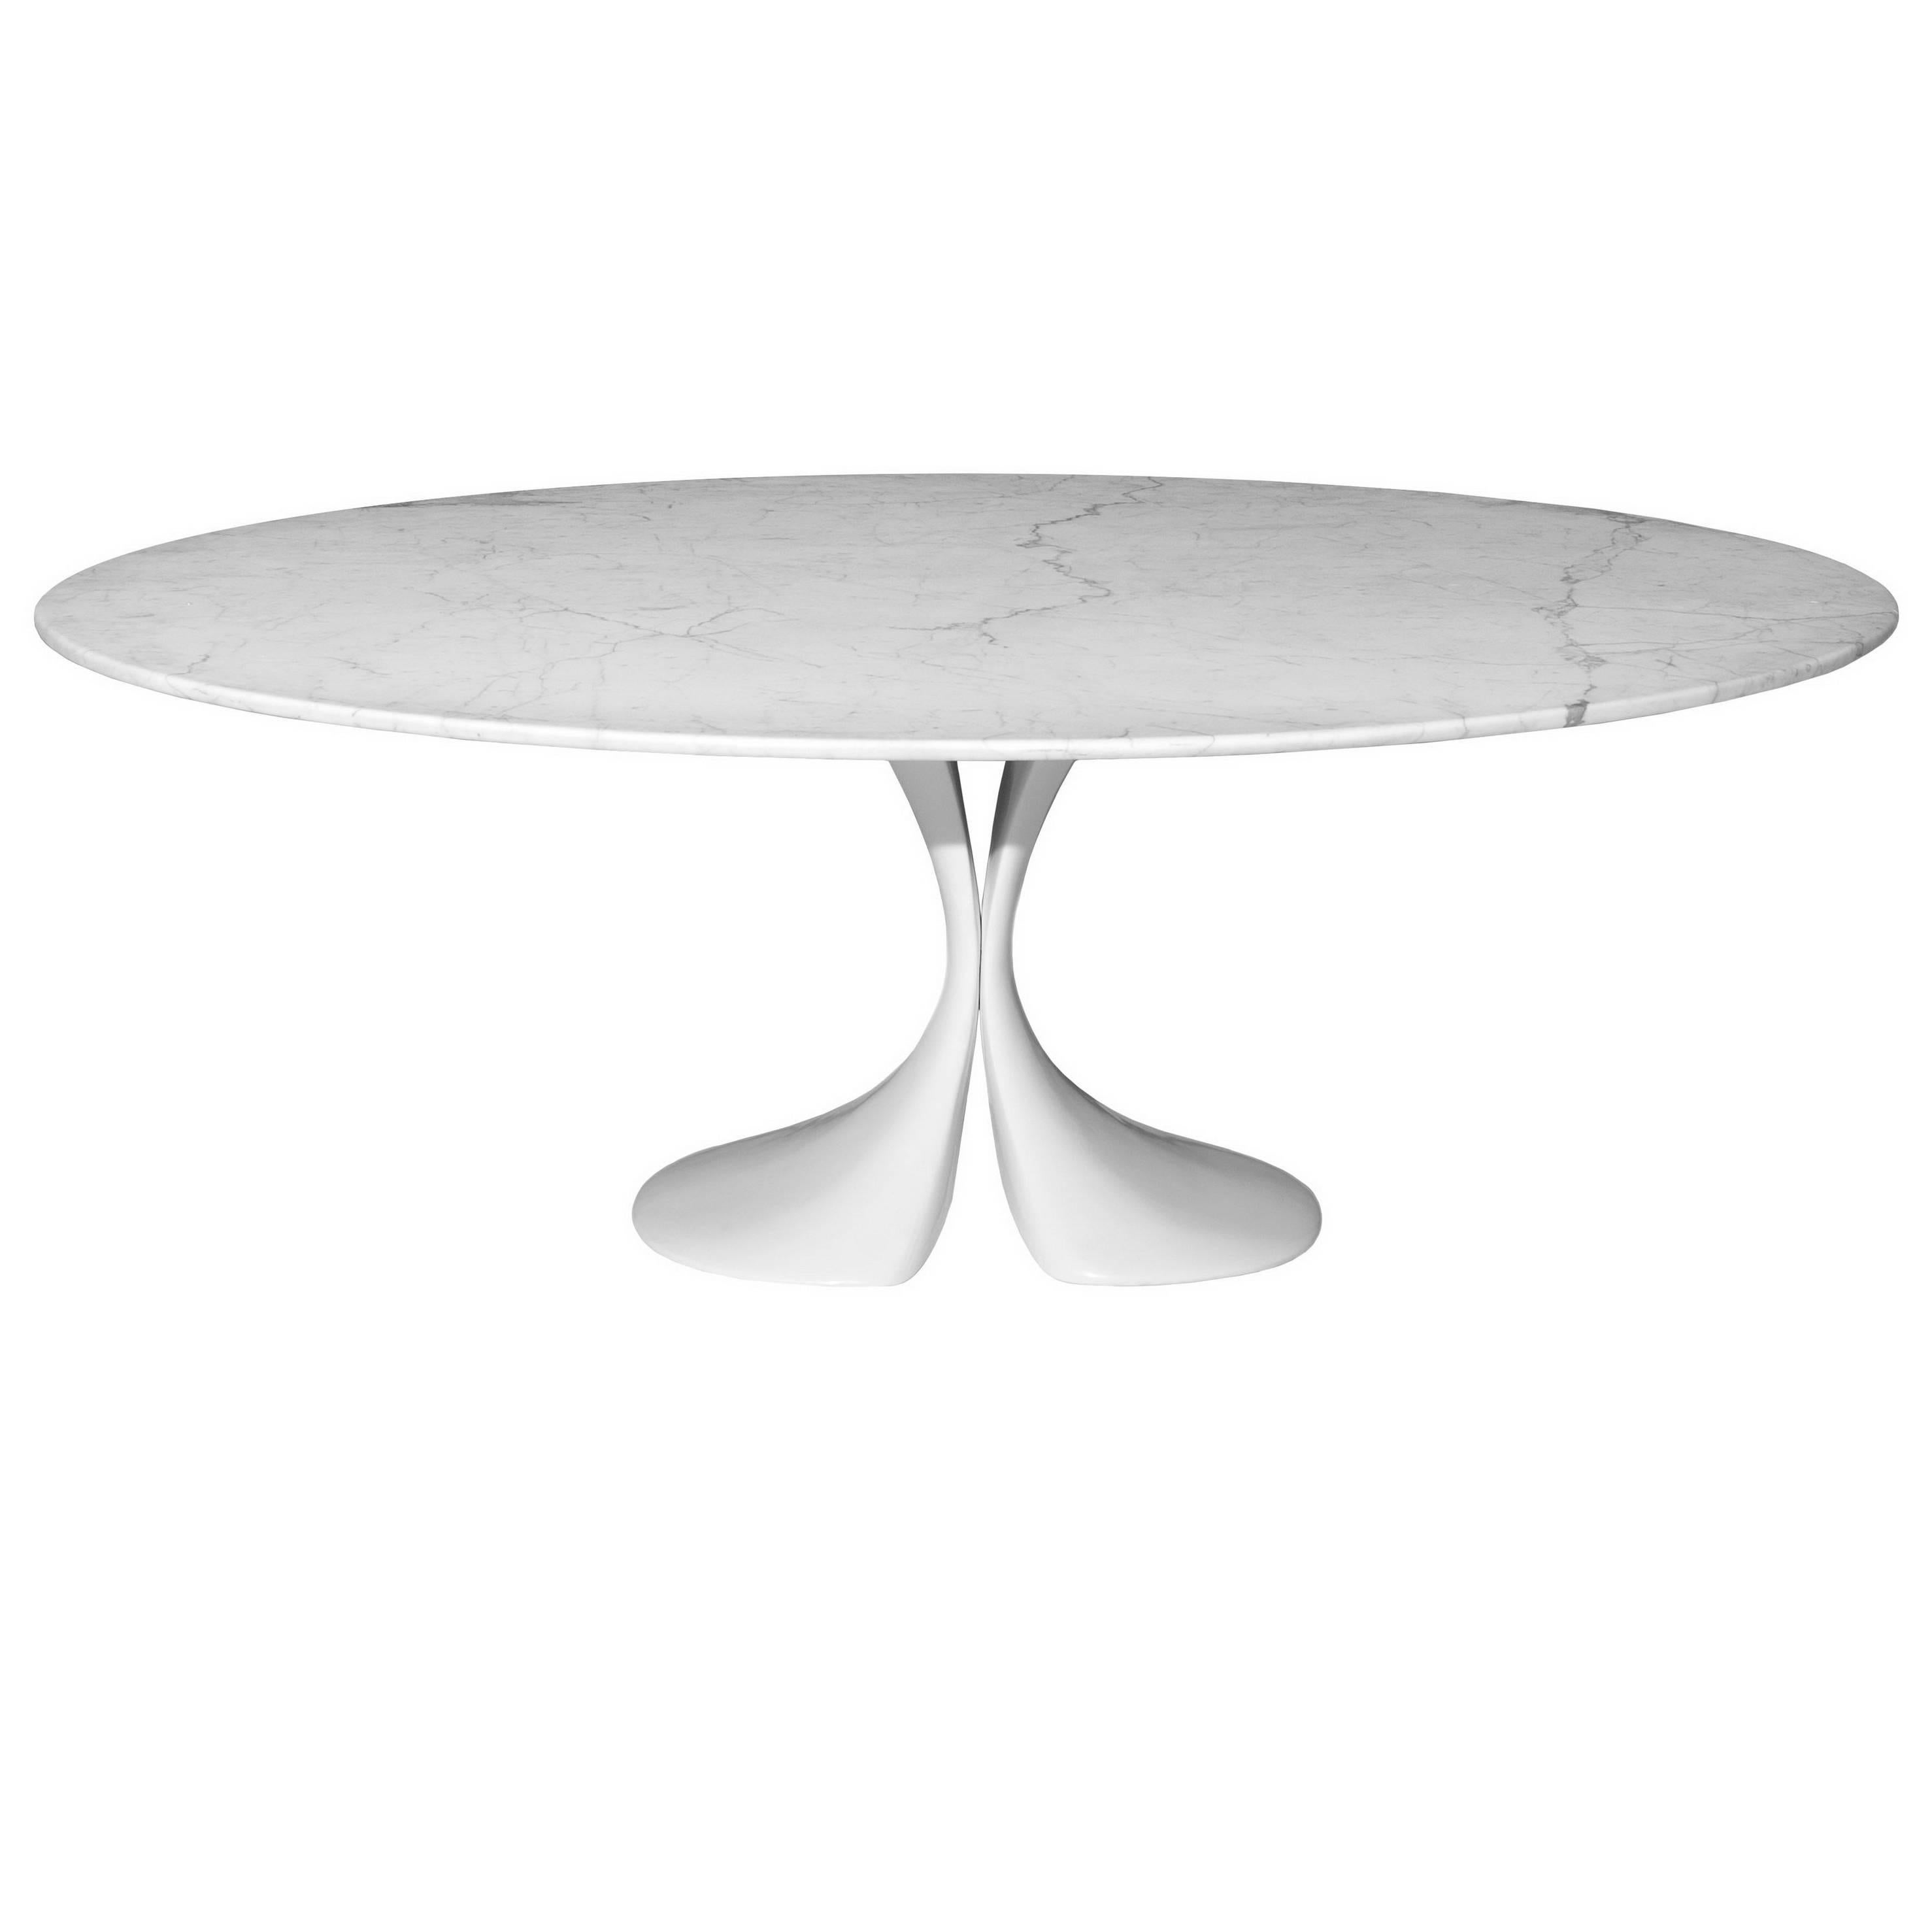 "Didymos" Oval Marble Top and Crystalplant Base Table by A. Astori for Driade